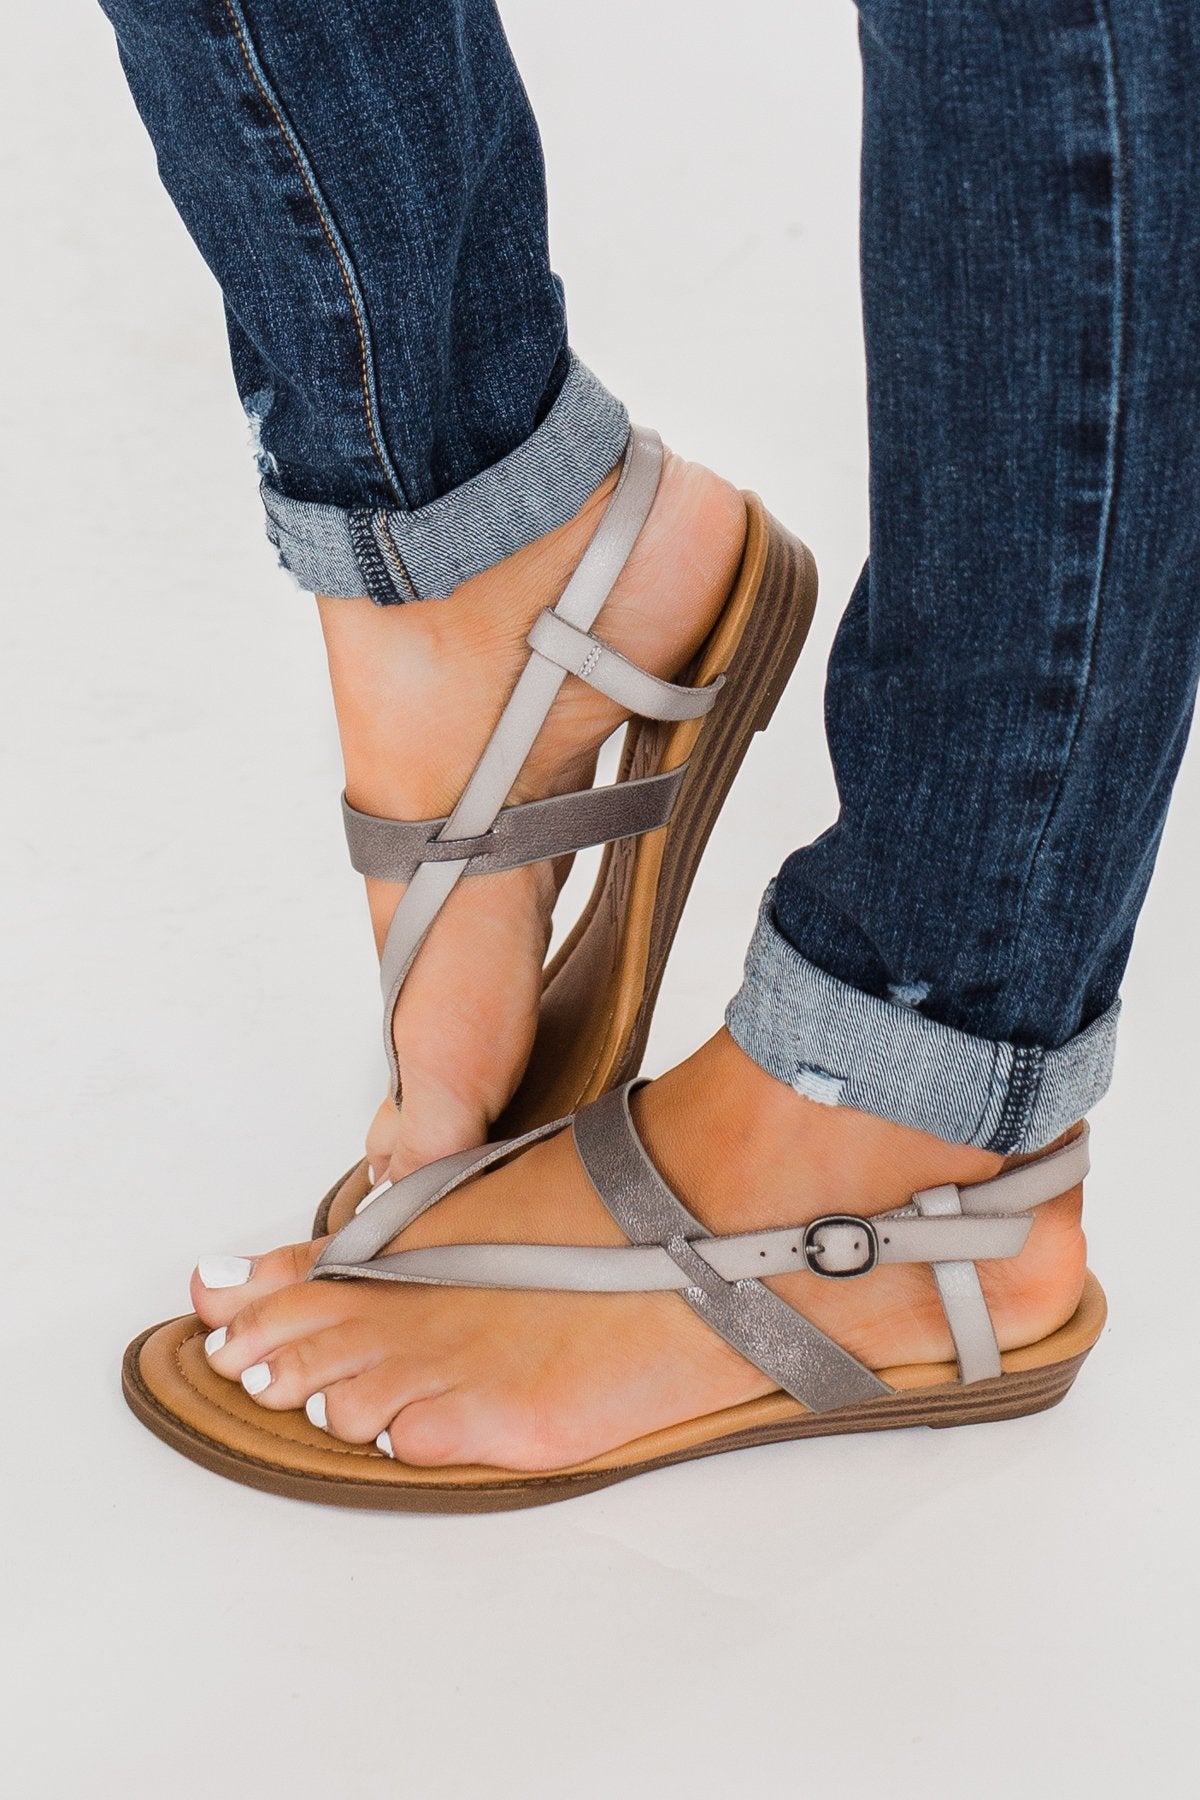 Blowfish Berg Sandals- Smoke & Pewter – The Pulse Boutique